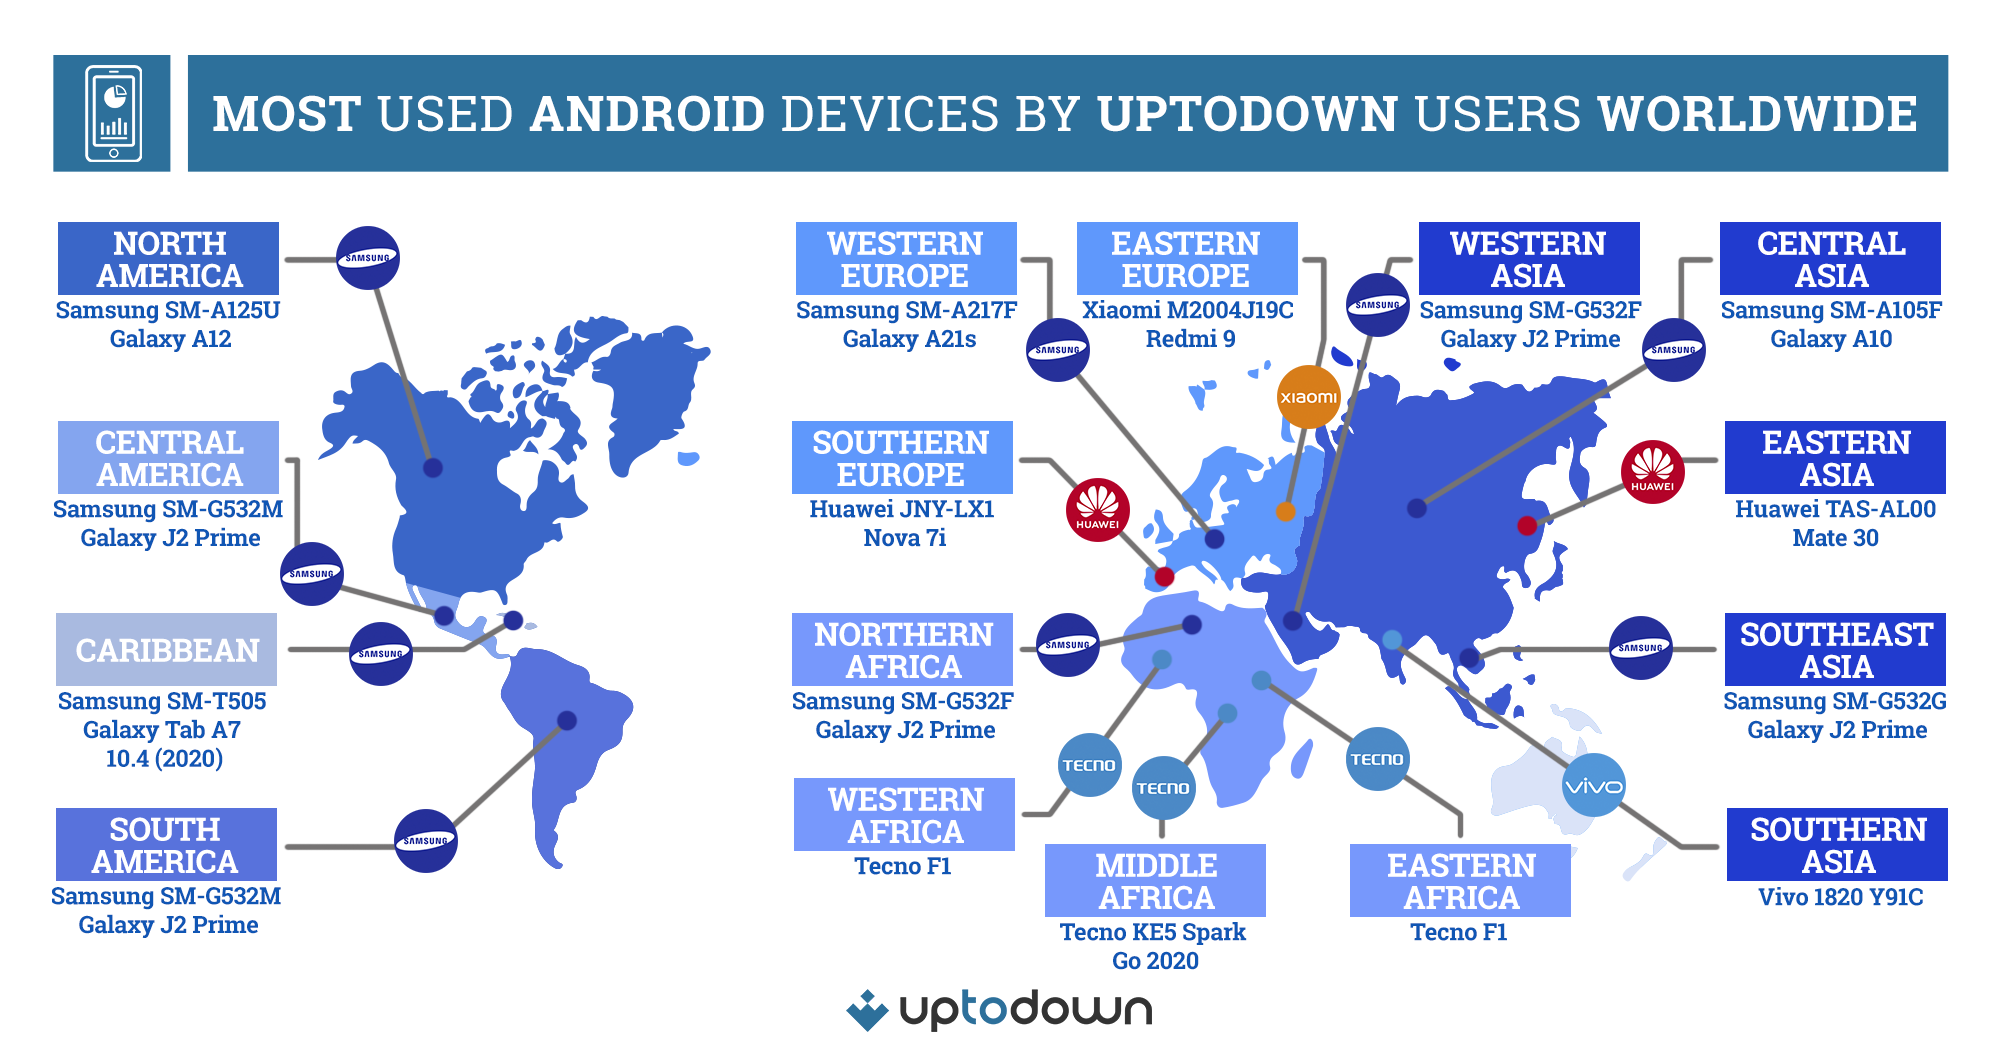 Private: The most used Android mobile devices throughout the world, according to Uptodown research